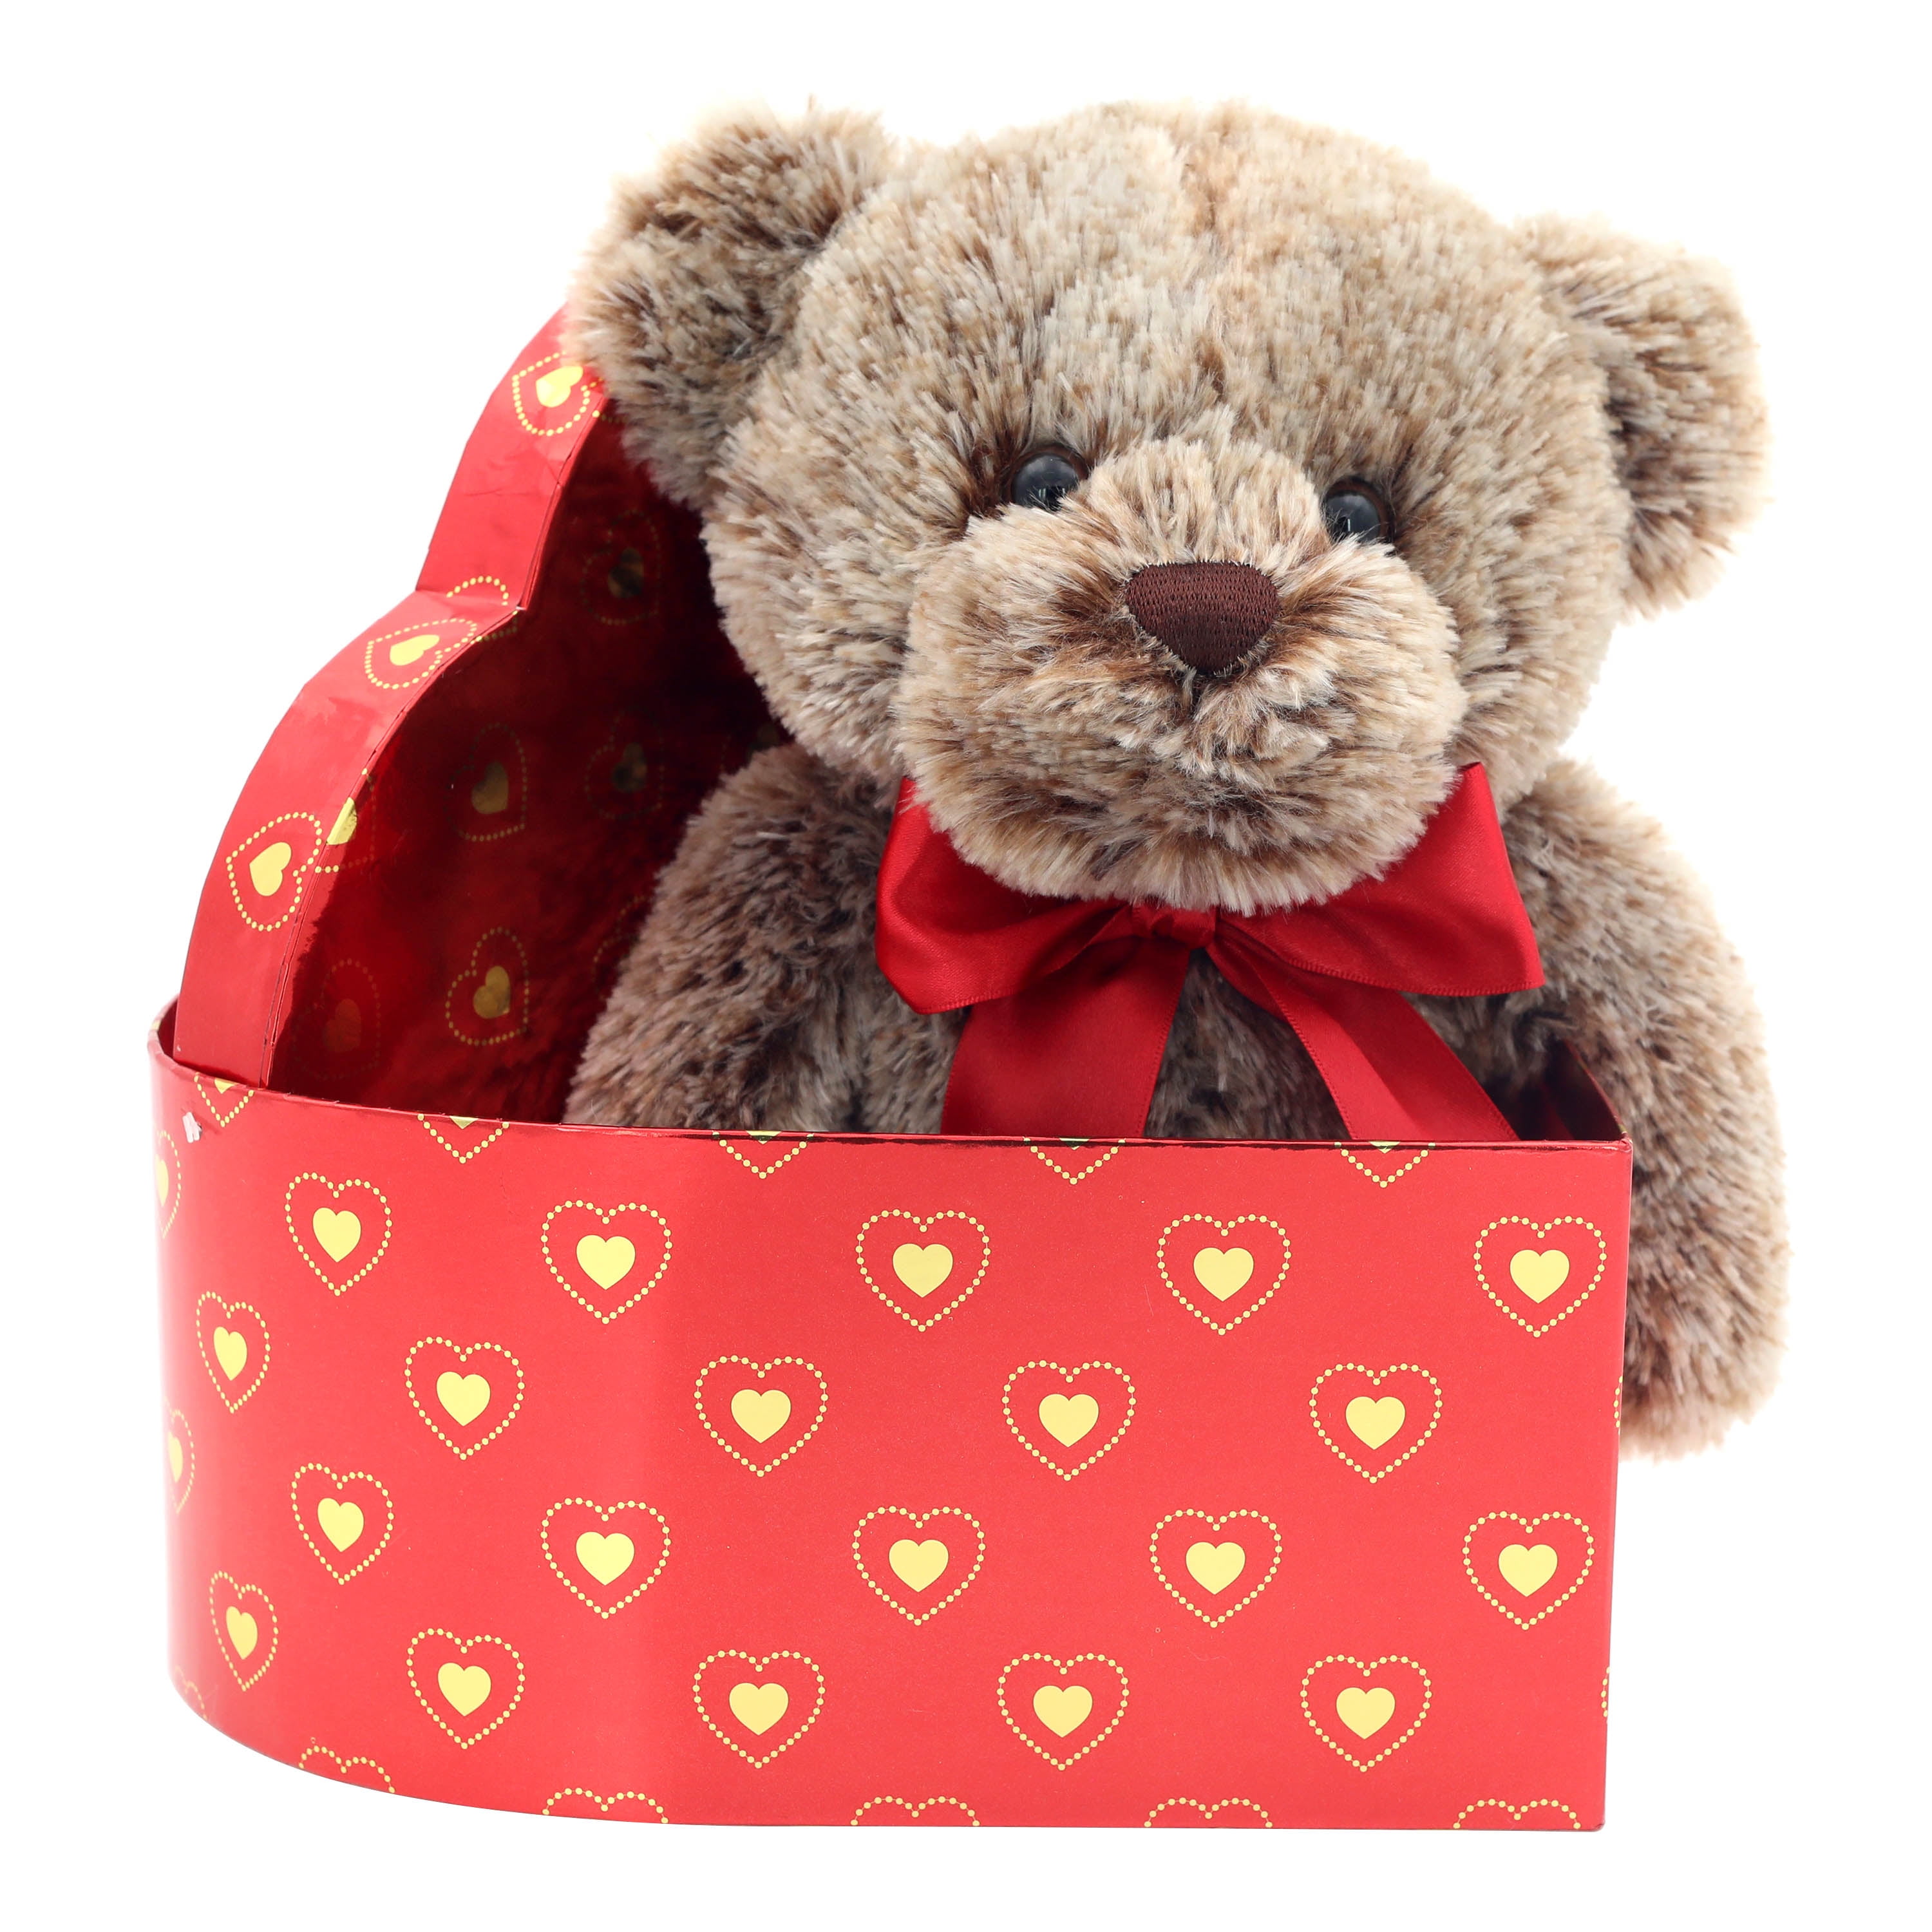 Way to Celebrate! Valentine's Day Plush Chocolate Scented Teddy Bear in Deluxe Gift Box, Brown